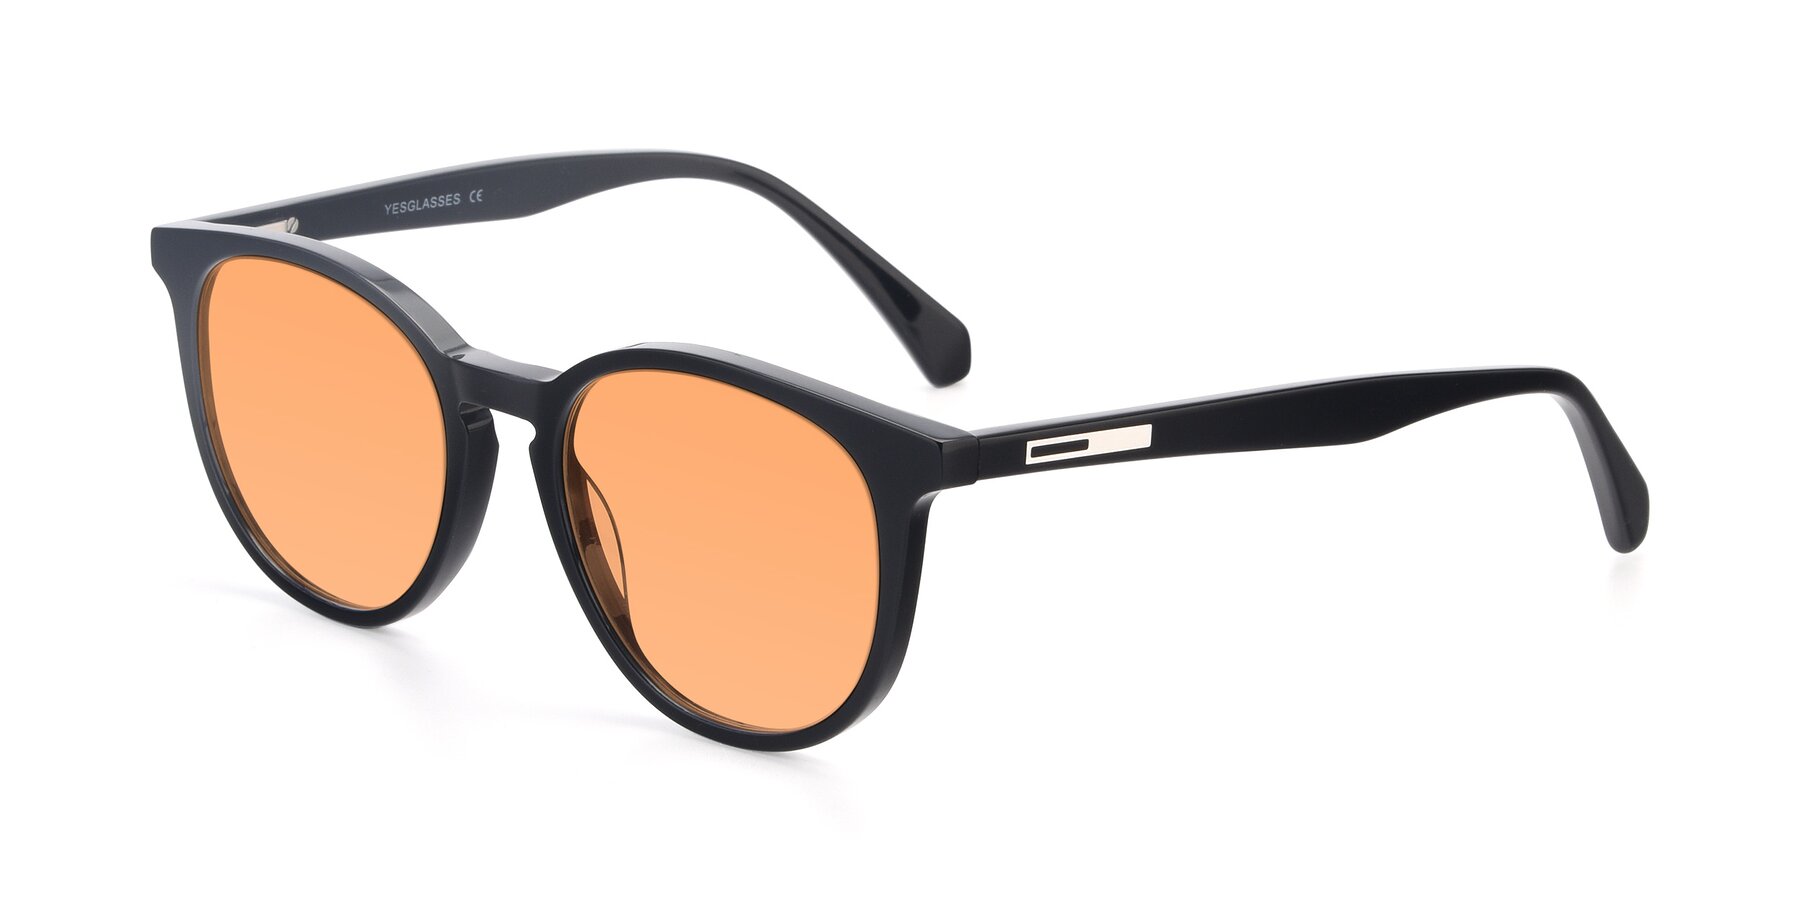 Angle of 17721 in Black with Medium Orange Tinted Lenses